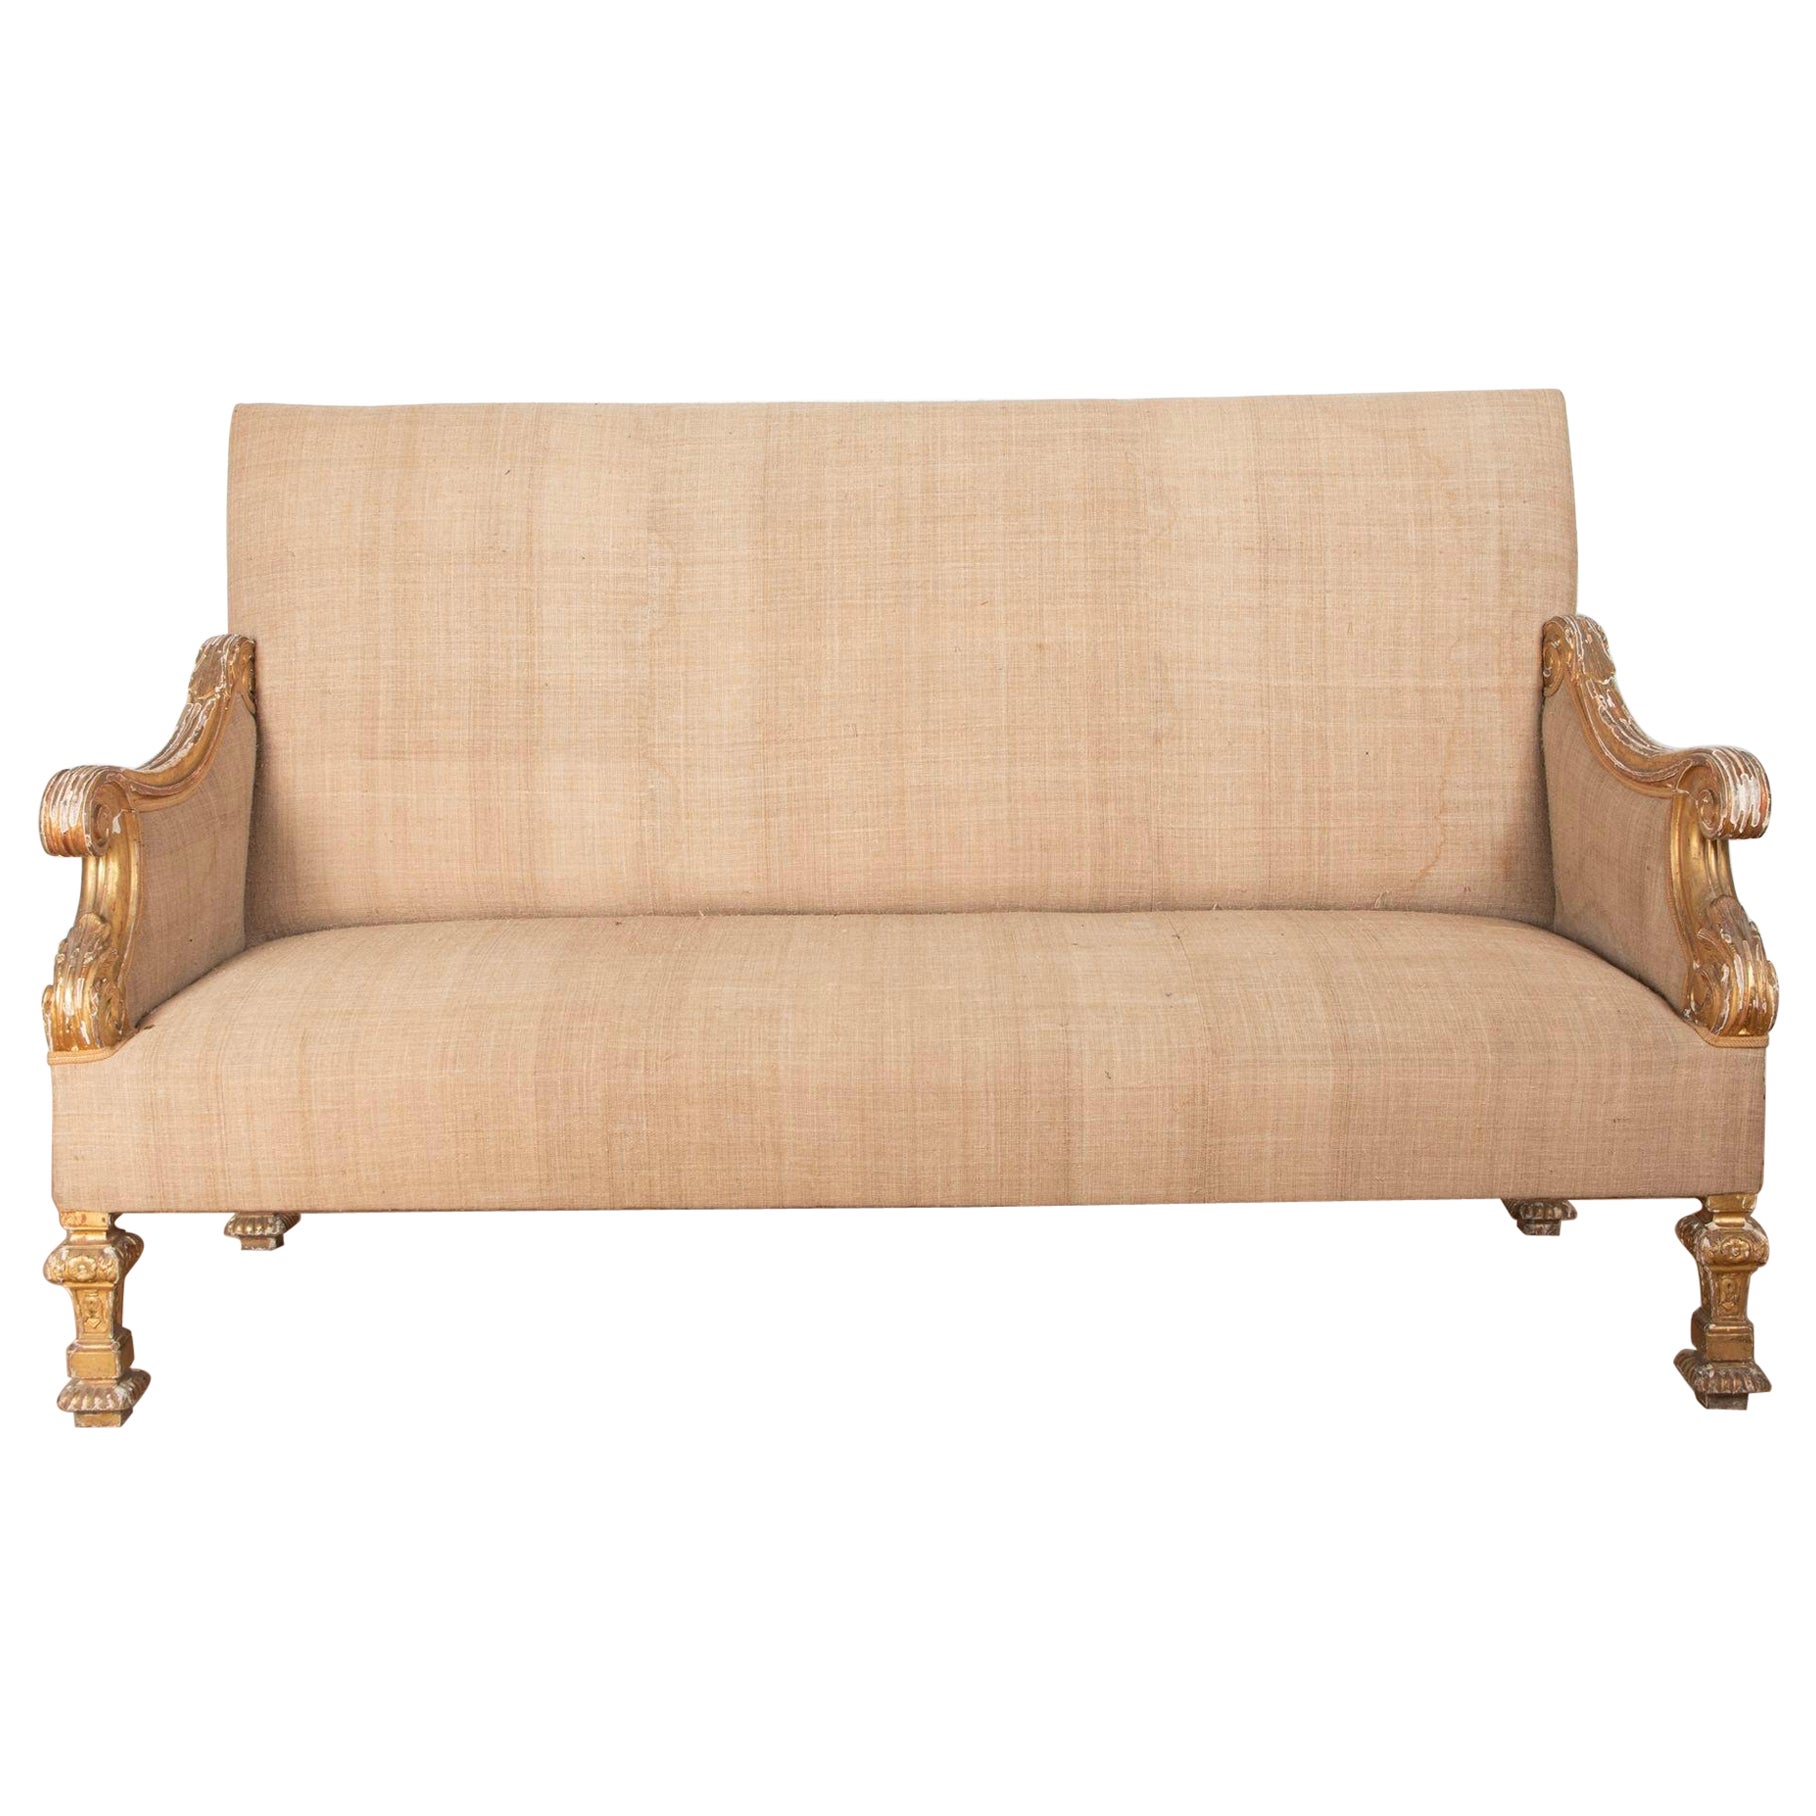 19th Century Louis XIV Style Giltwood Sofa For Sale